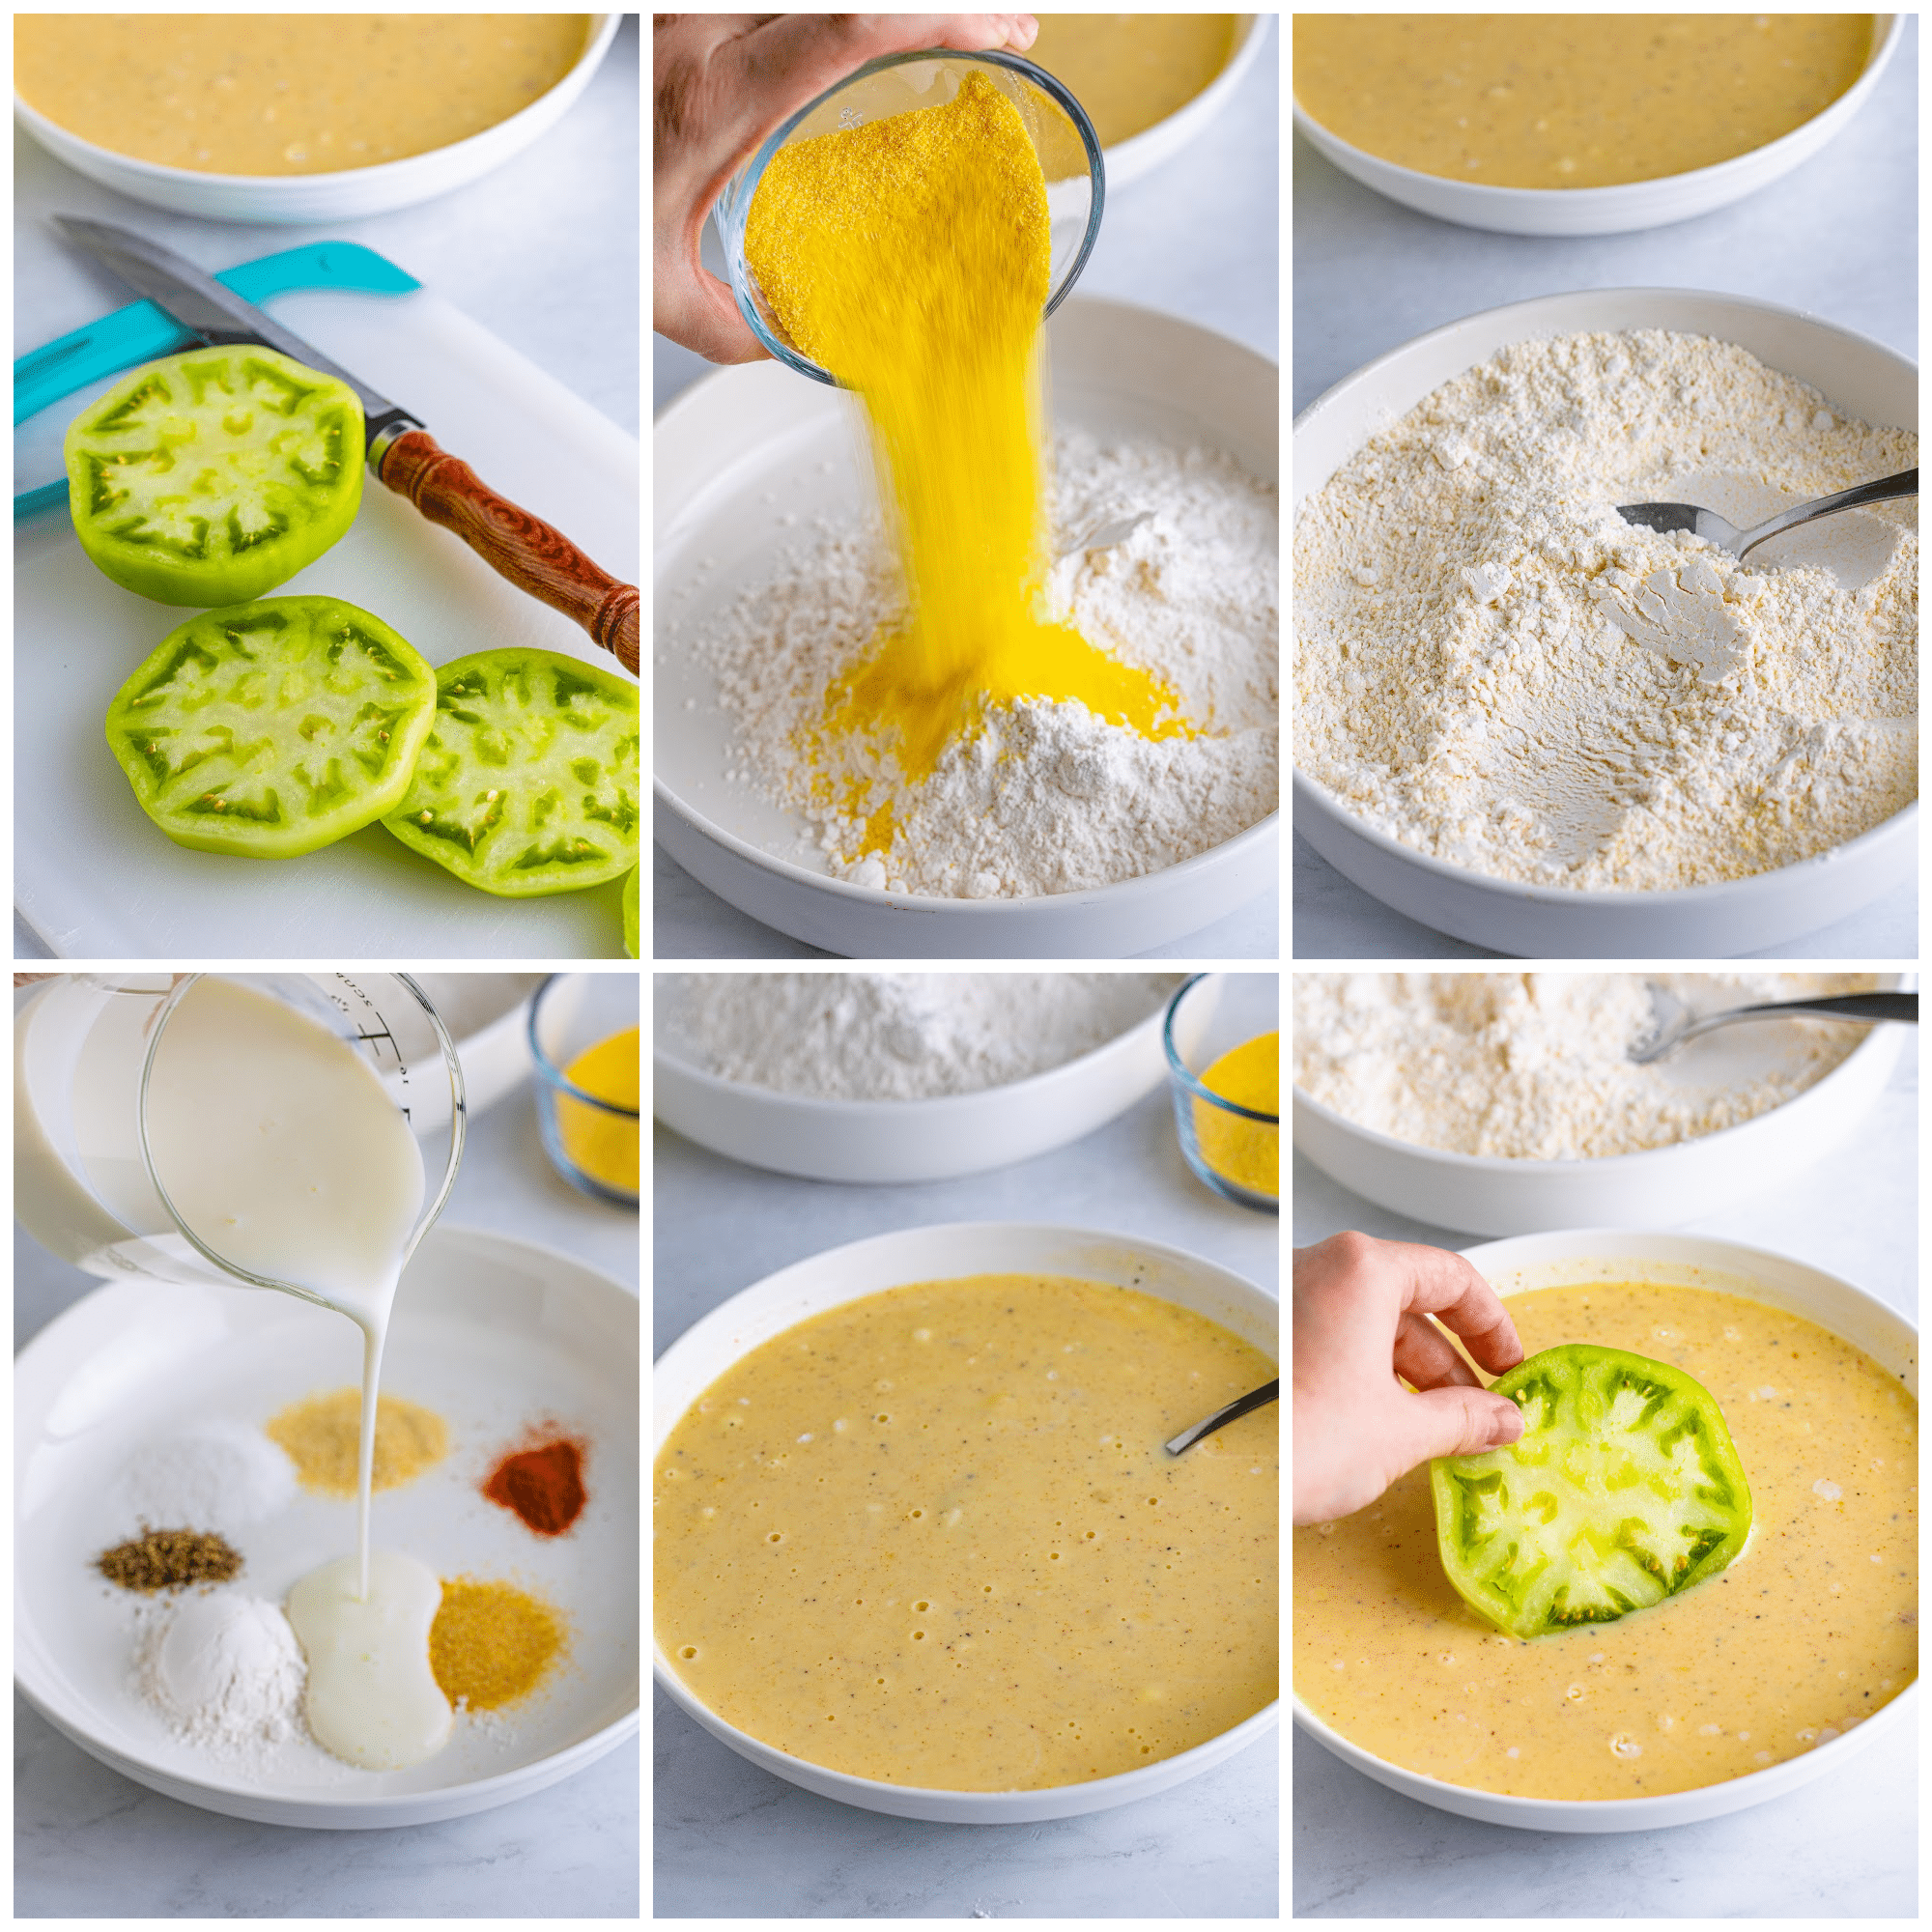 Collage of images showing steps 1-6 of the recipe.